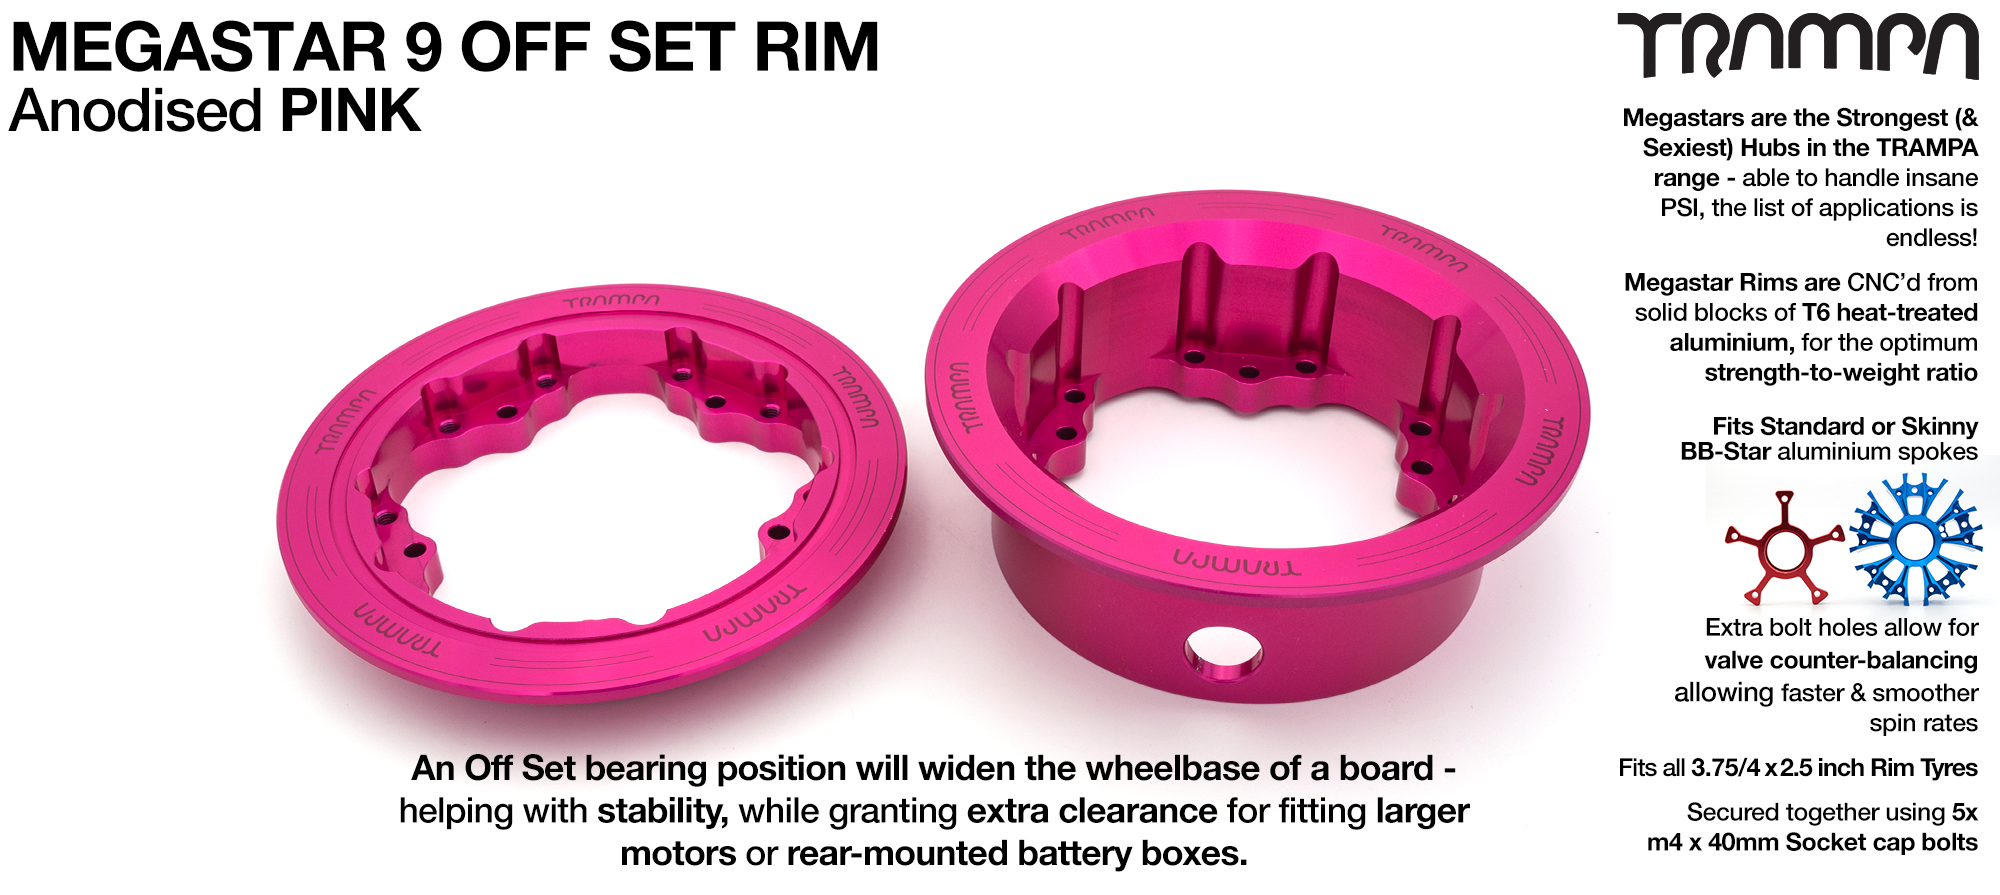 MEGASTAR 9 Rims Measure 3.75/4x 2.5 Inch & the bearings are positioned OFF-SET & accept 3.75 & 4 Inch Rim Tyres - PINK